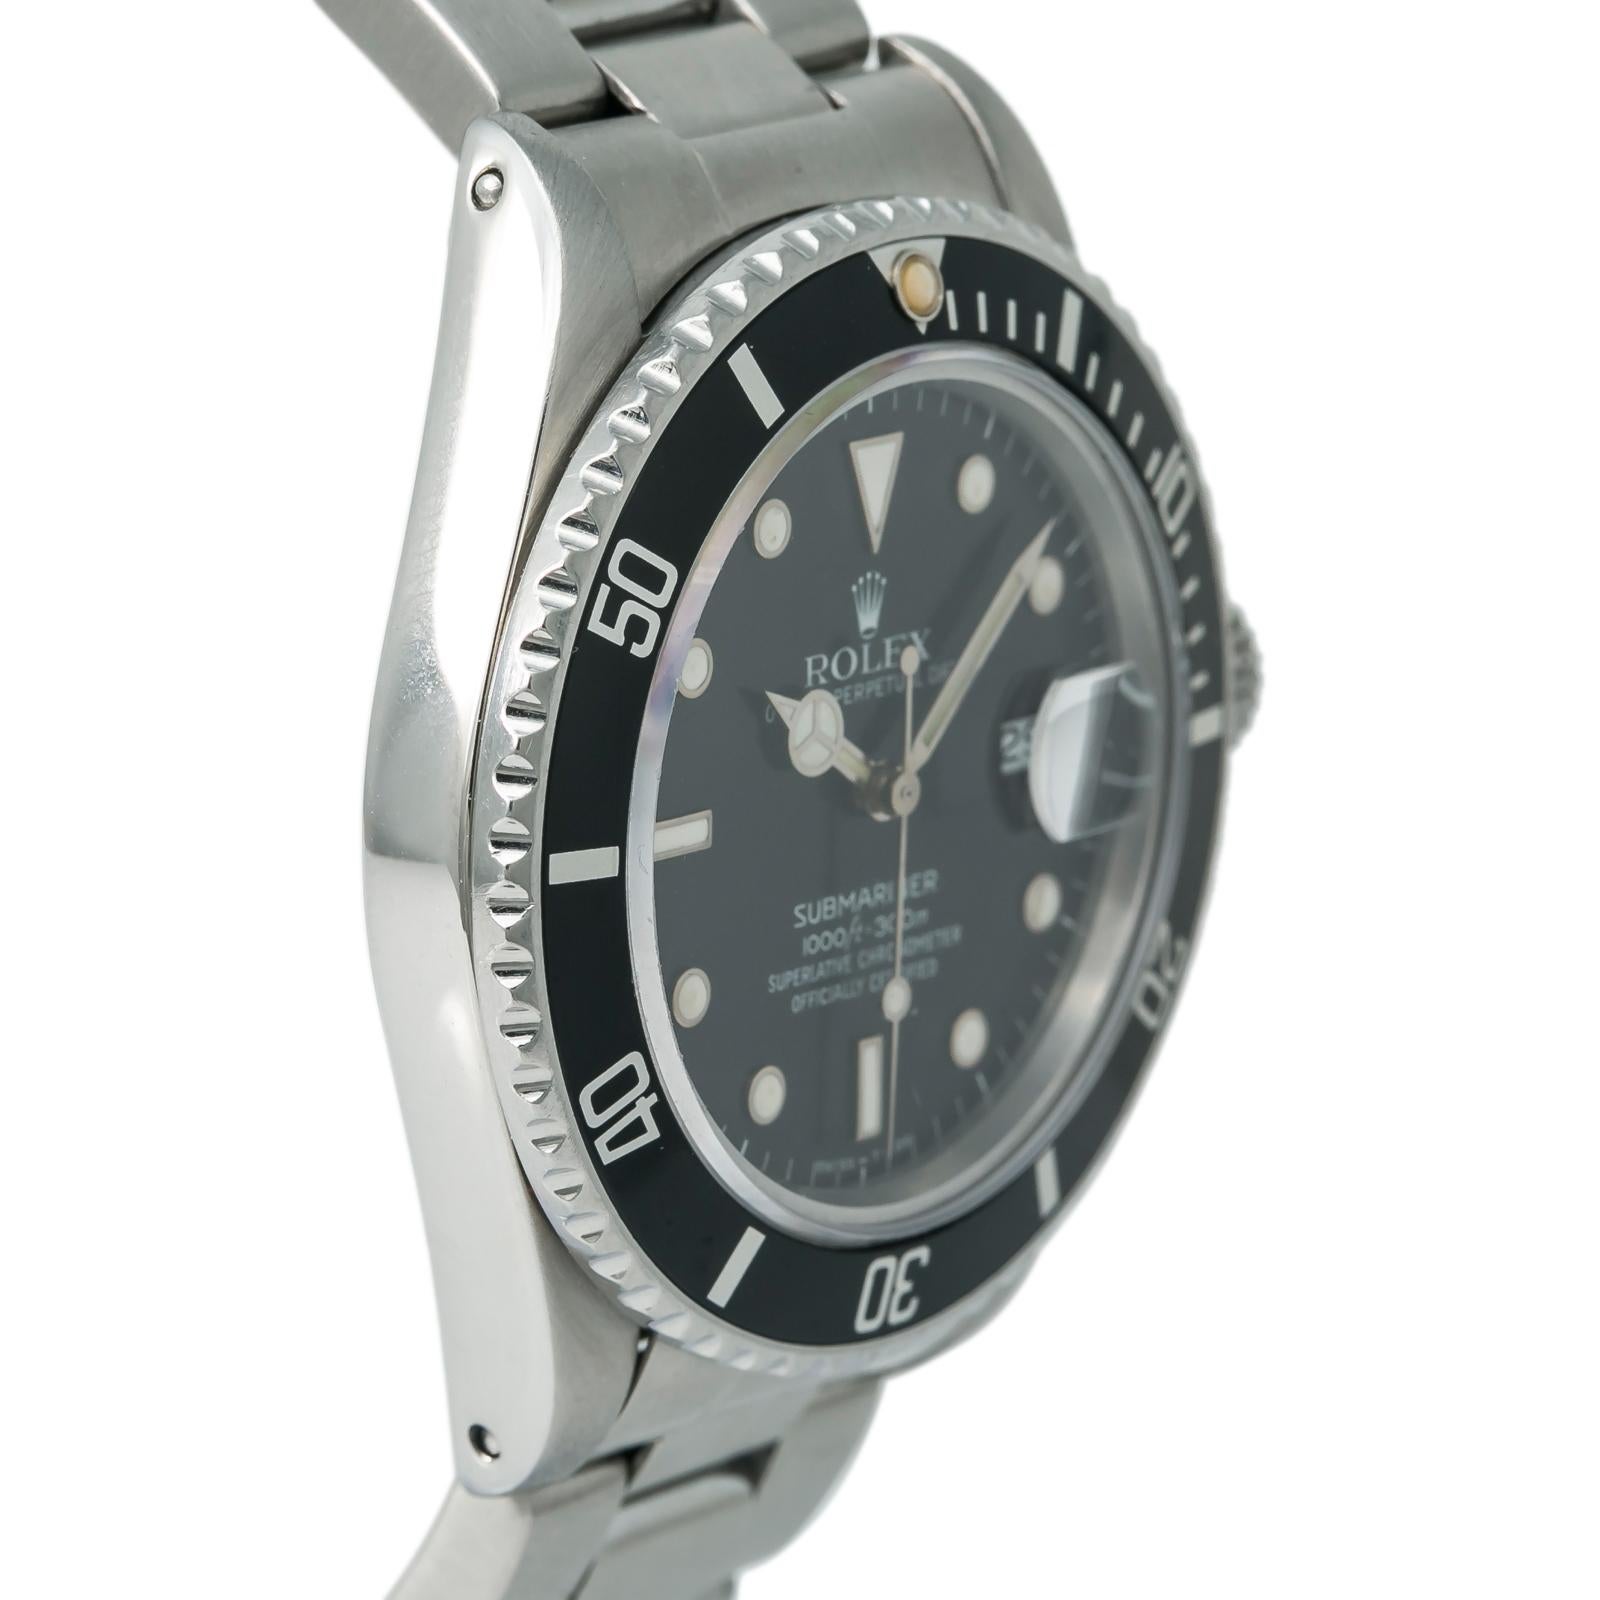 Rolex Submariner 16800 Men's Automatic Watch Stainless Steel Black Dial In Good Condition For Sale In Miami, FL